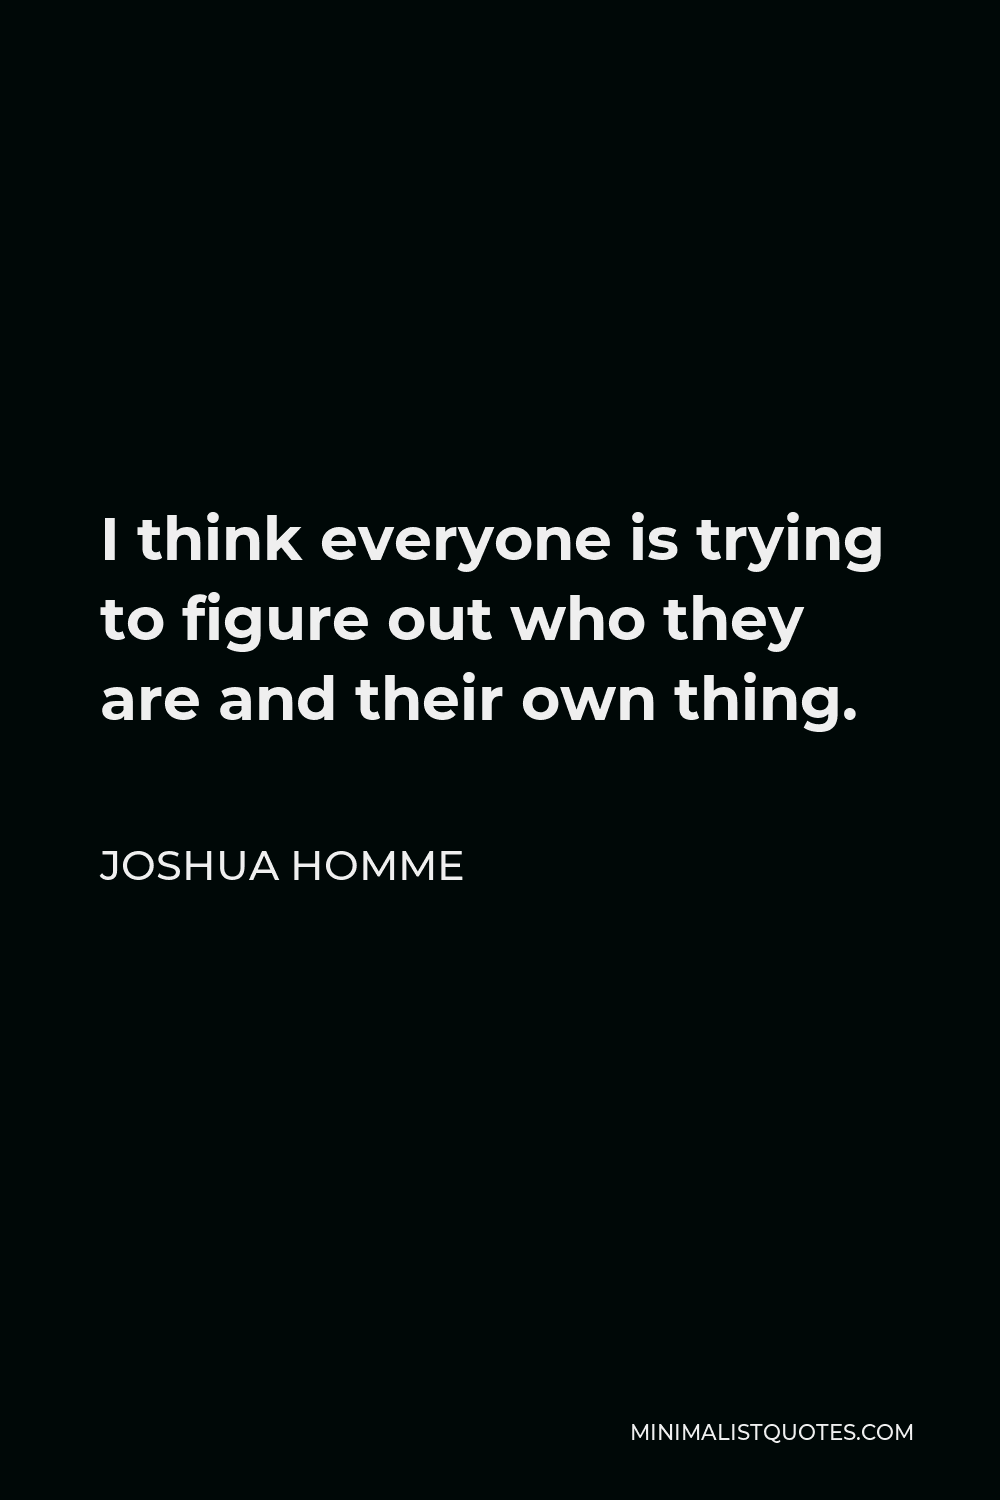 Joshua Homme Quote - I think everyone is trying to figure out who they are and their own thing.